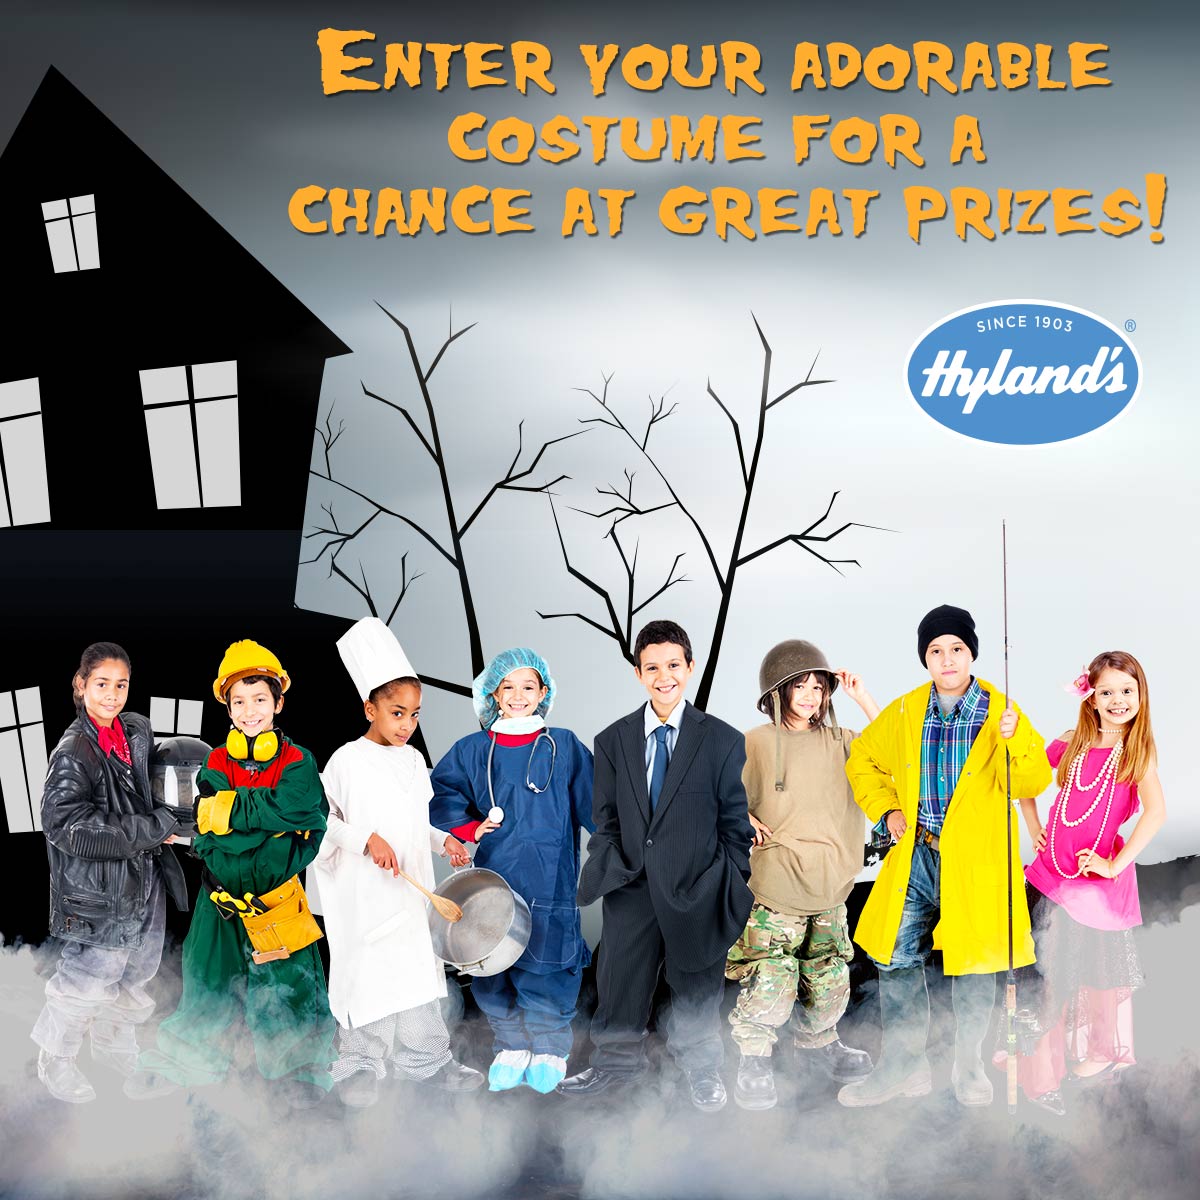 Enter to Win the Hylands Halloween Costume Contest